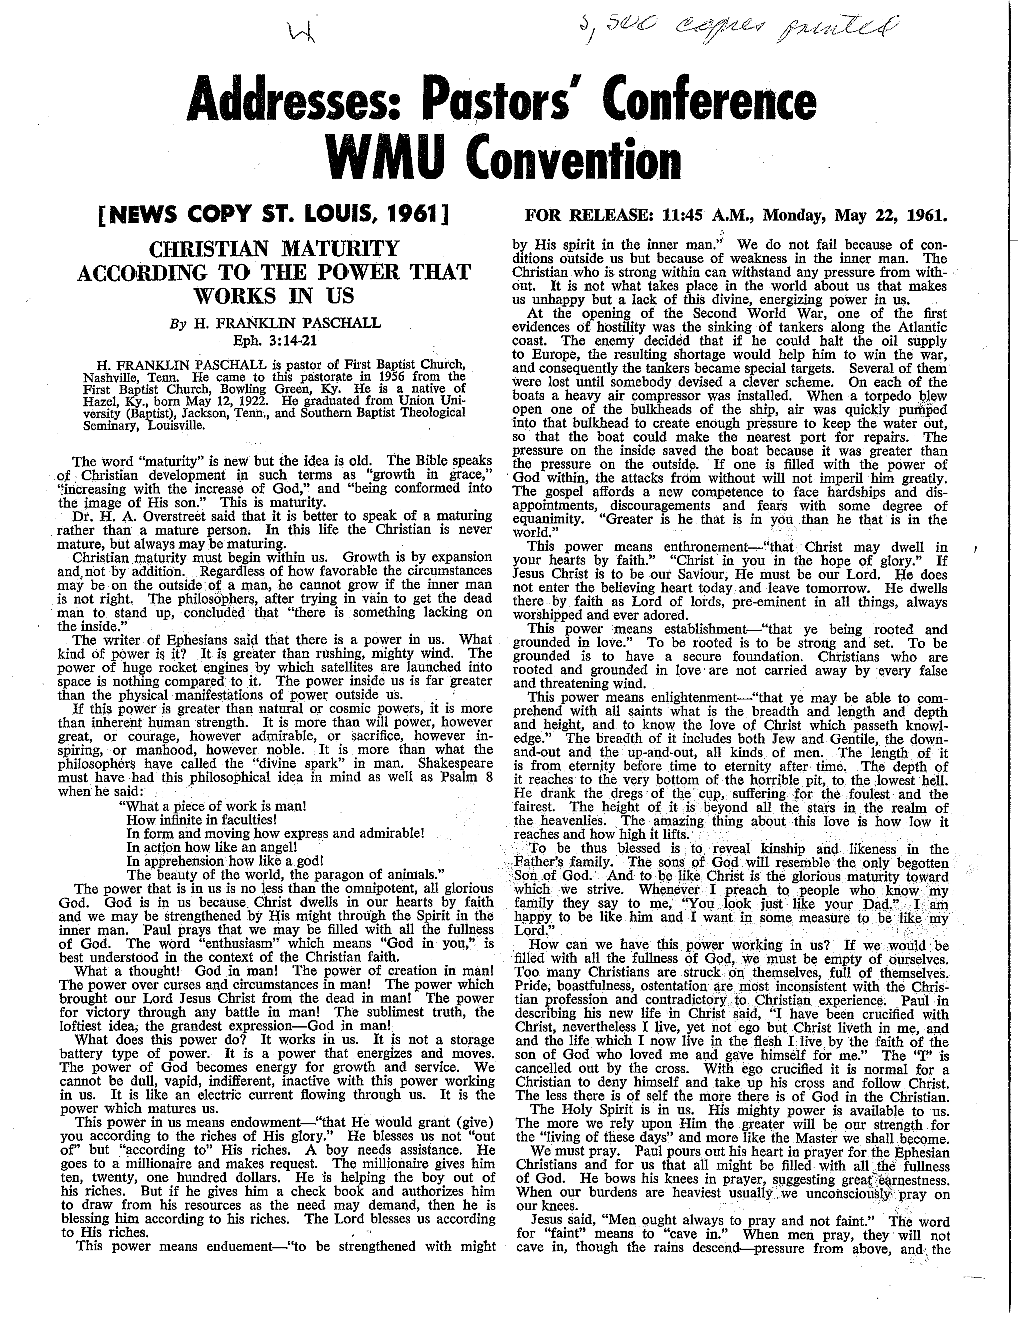 Pustors' Conference WMU Convention [NEWS COPY ST